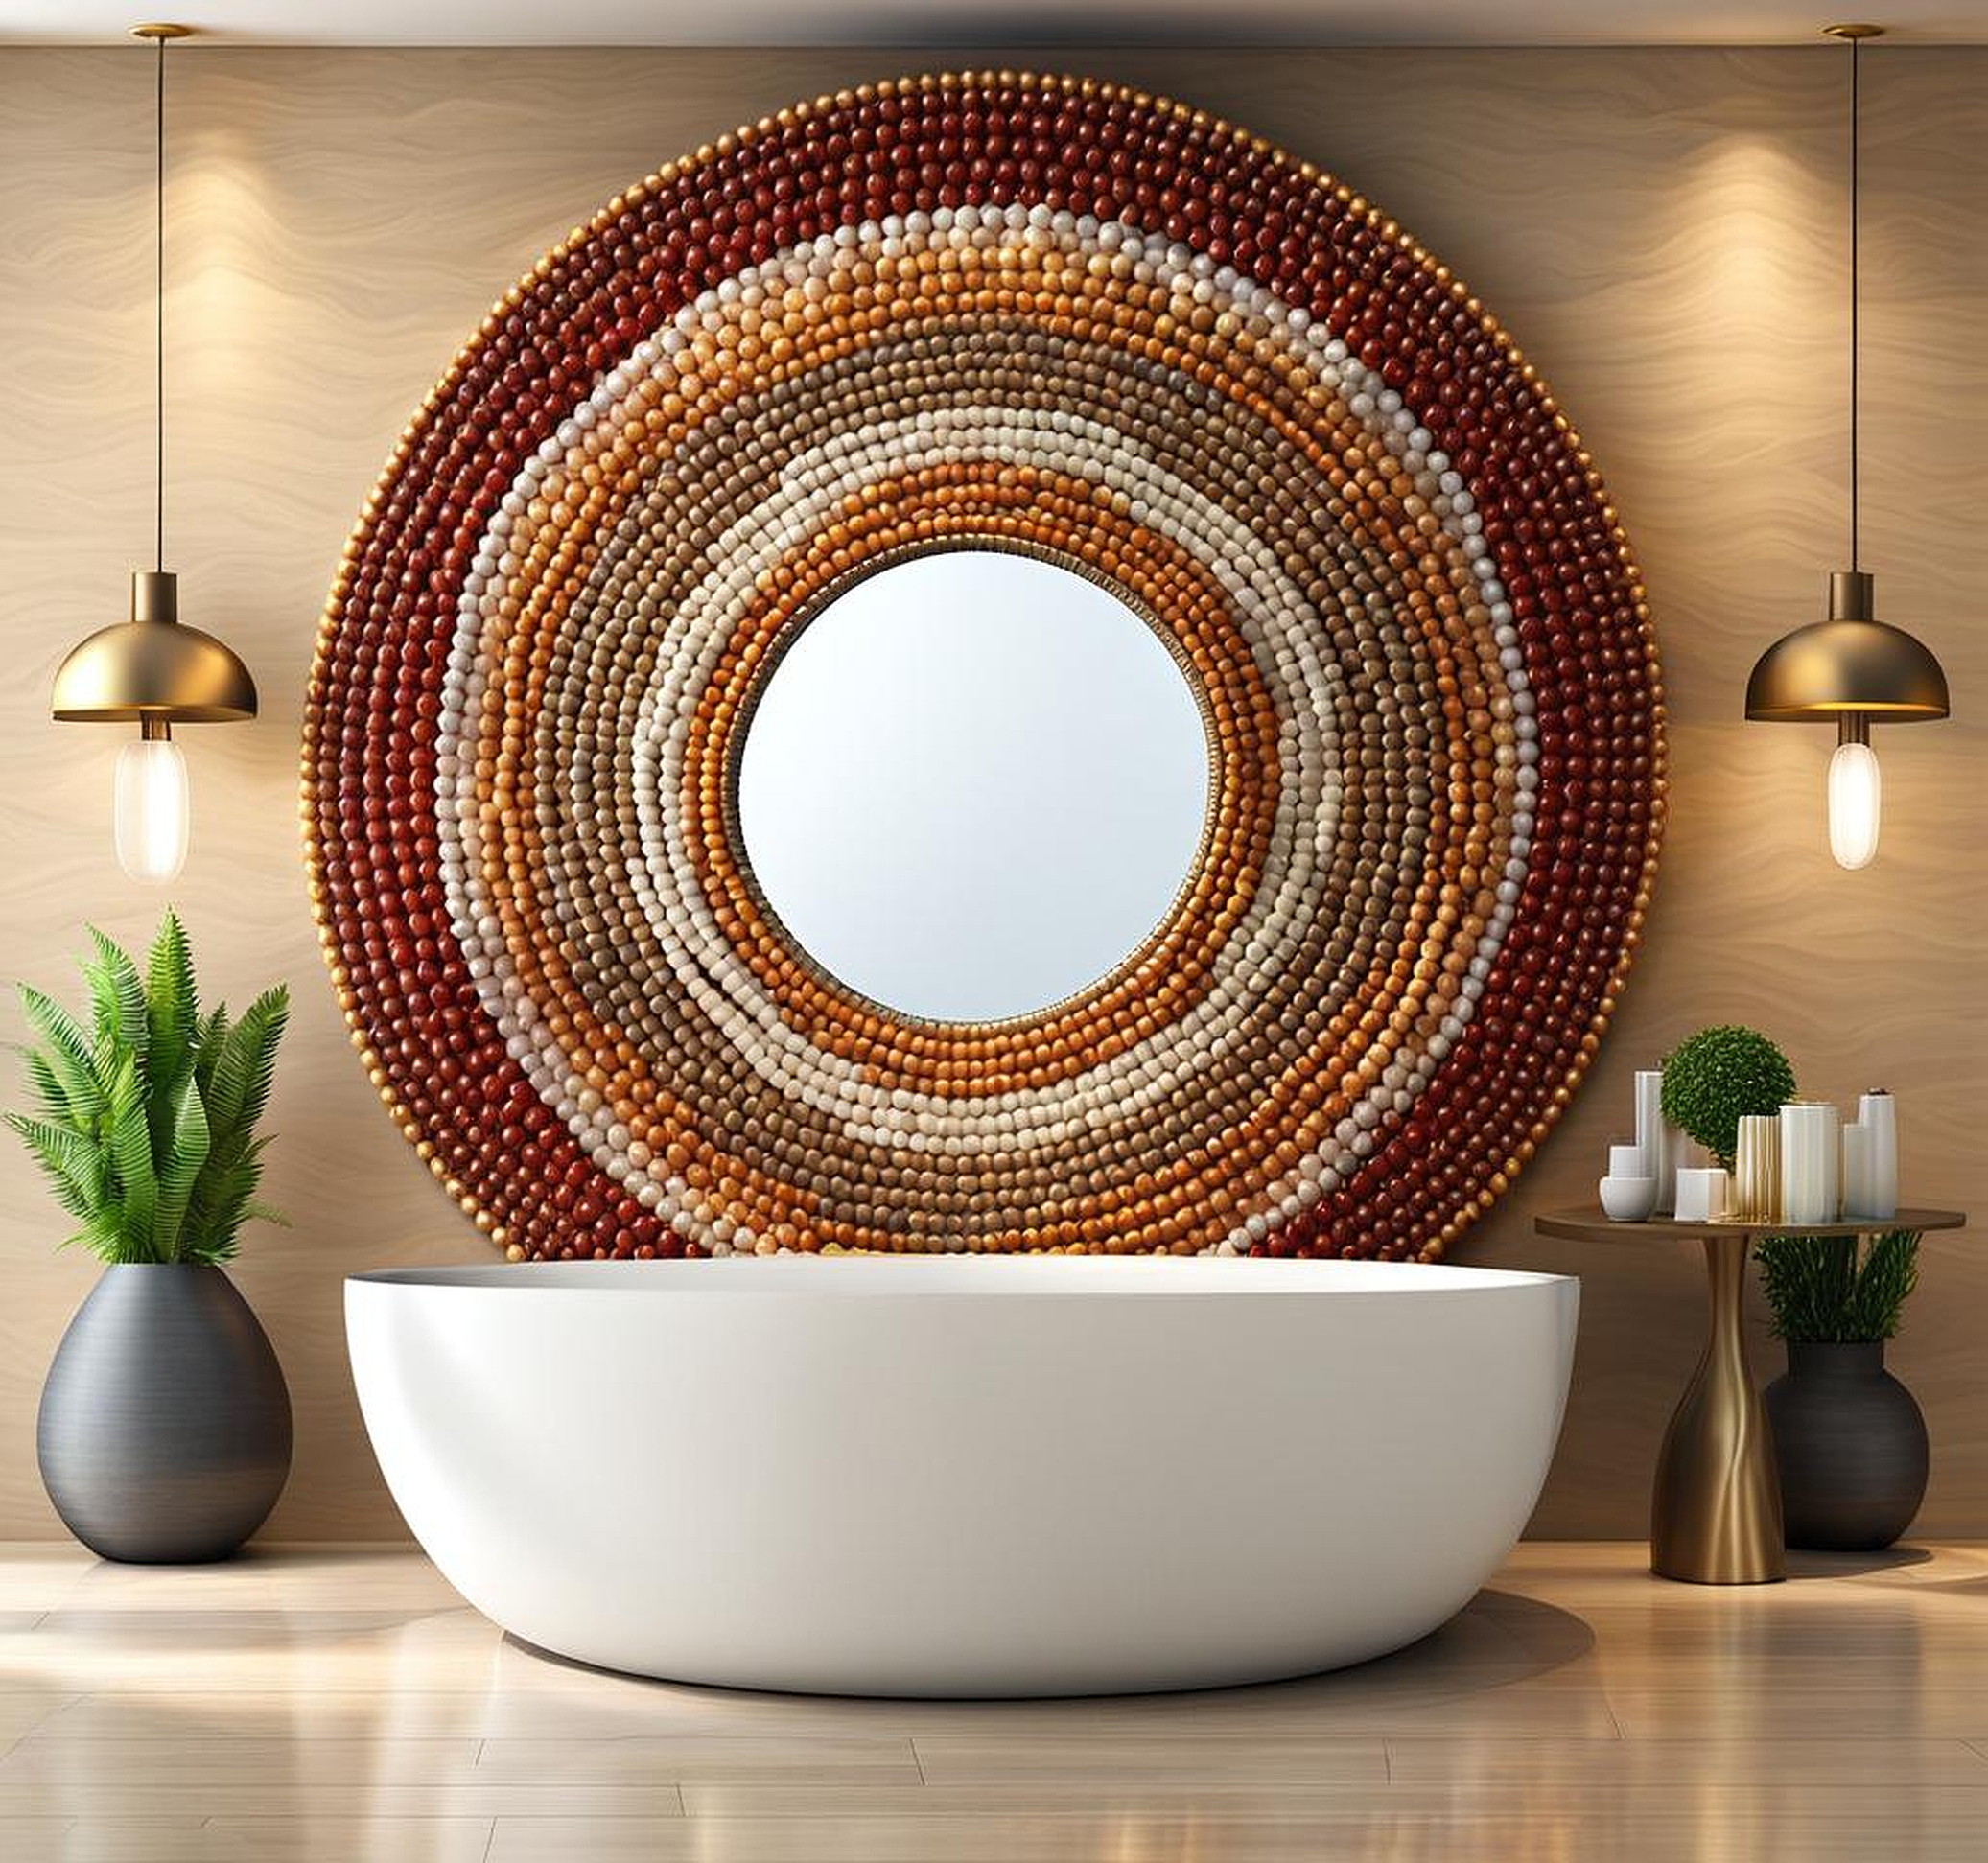 The Versatility of Round Natural Beaded Wall Mirrors in Different Decorating Styles